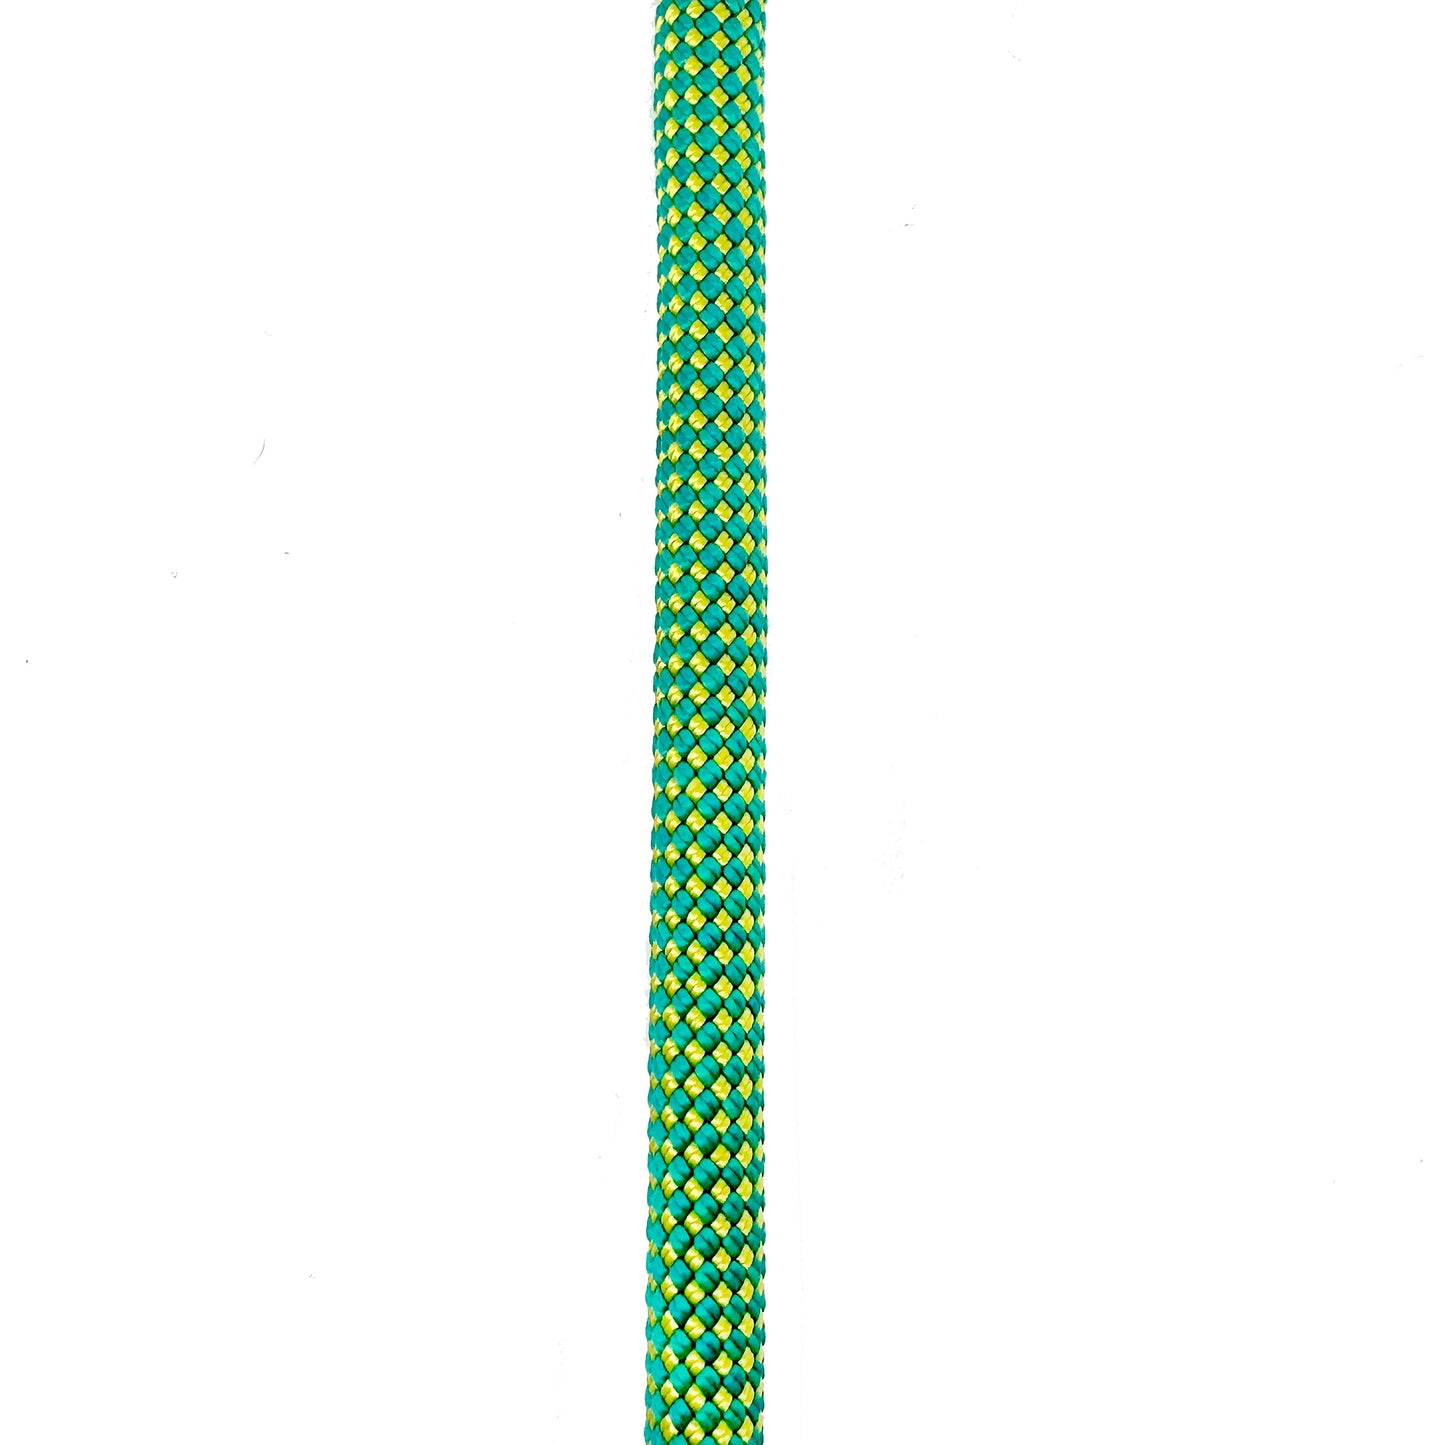 IN STOCK: Noctis Traffic Lead - Cosmic Chartreuse 9mm - 4 FT